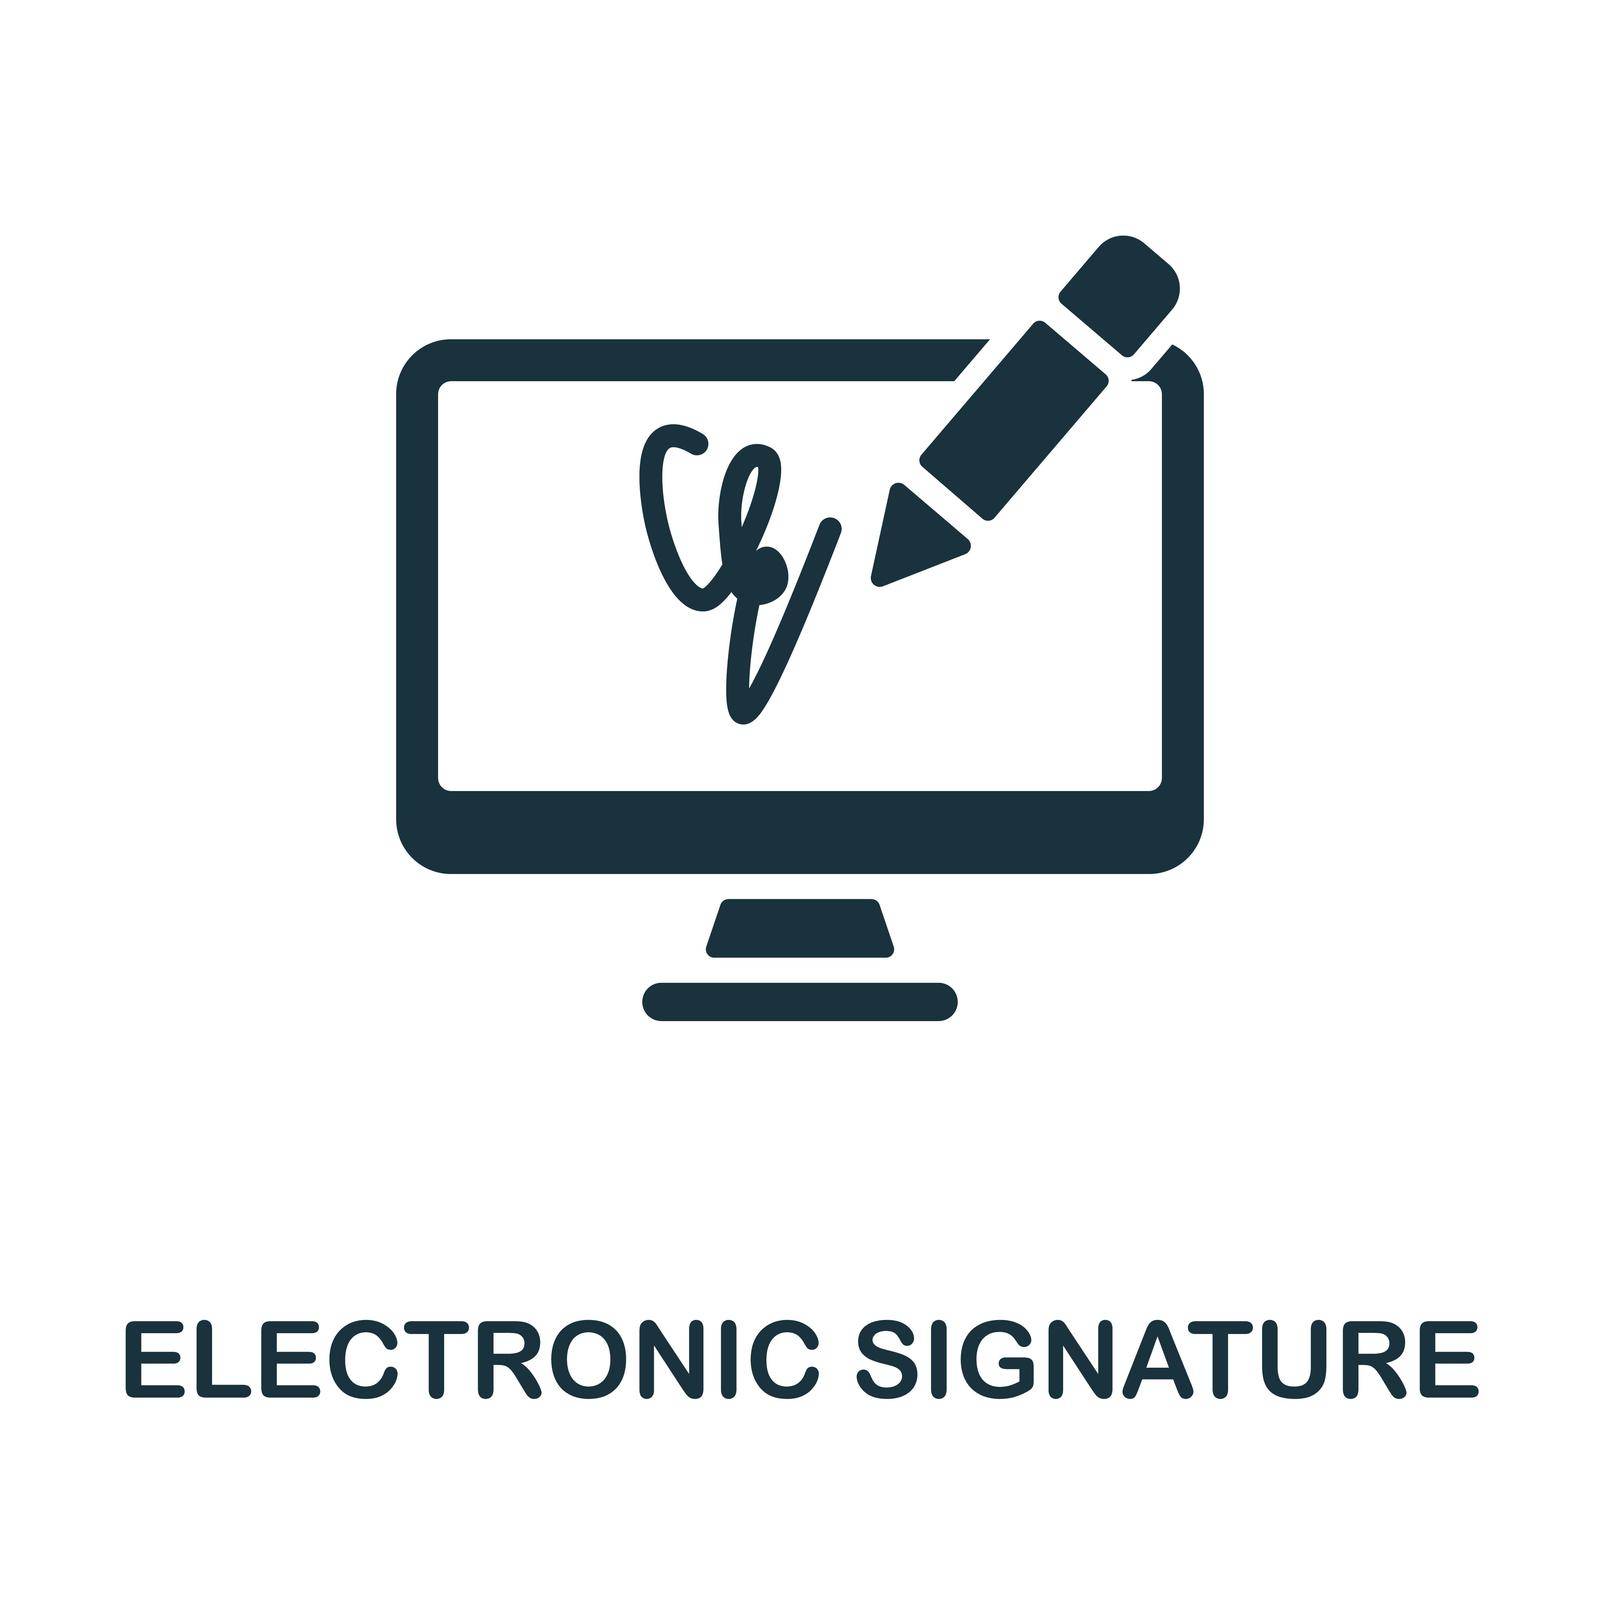 Electronic Signature icon. Simple line element electronic signature symbol for templates, web design and infographics.